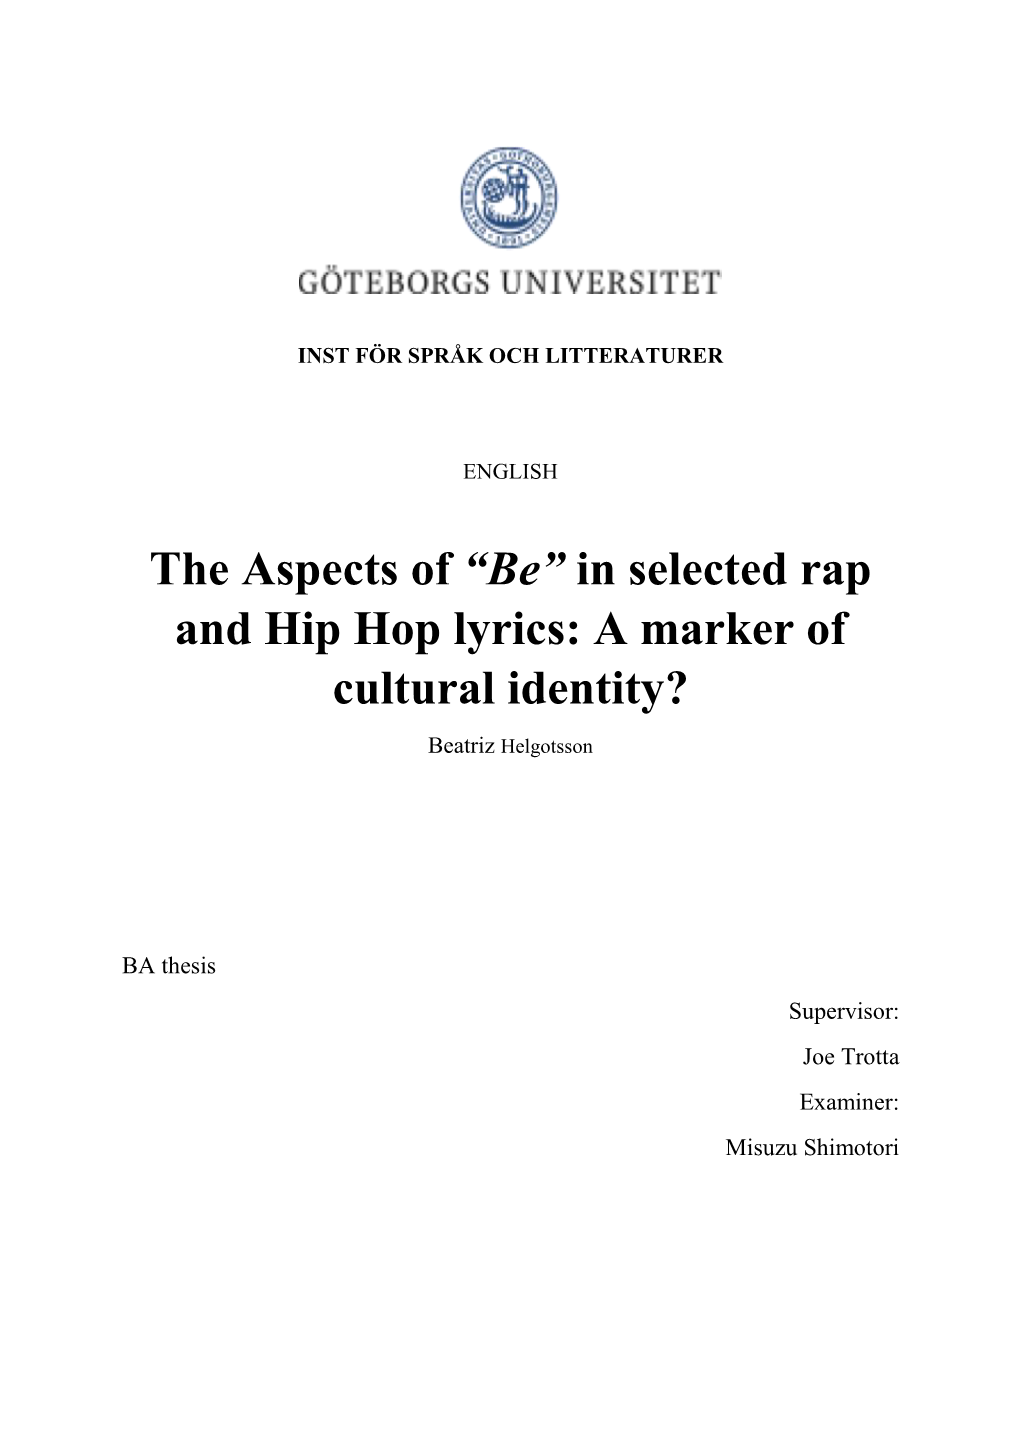 In Selected Rap and Hip Hop Lyrics: a Marker of Cultural Identity?